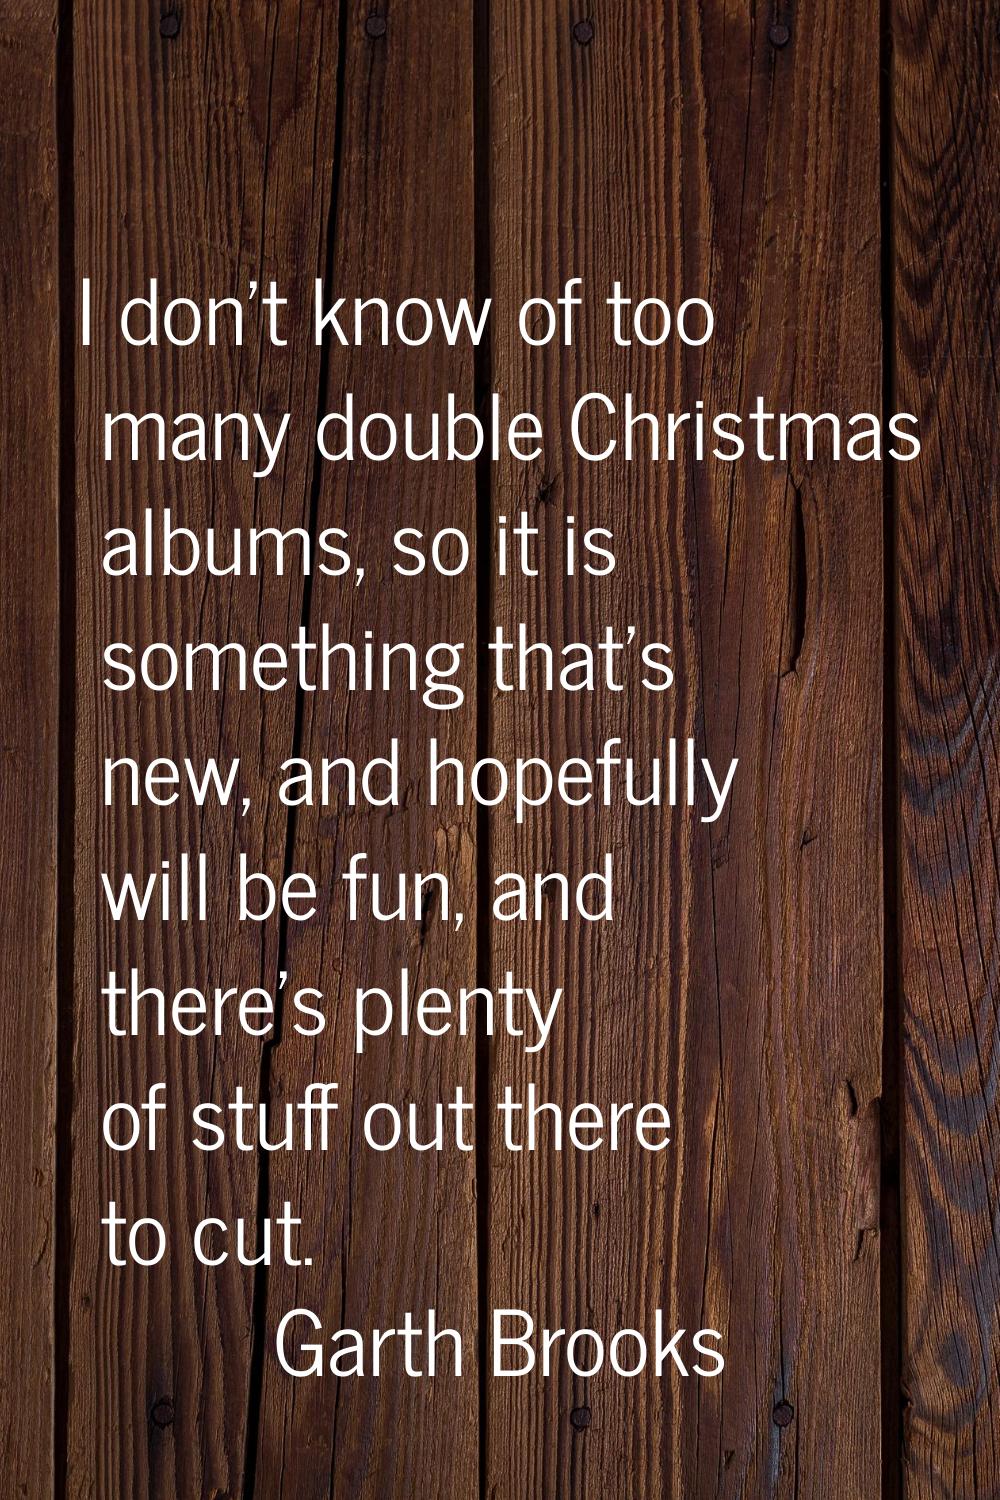 I don't know of too many double Christmas albums, so it is something that's new, and hopefully will